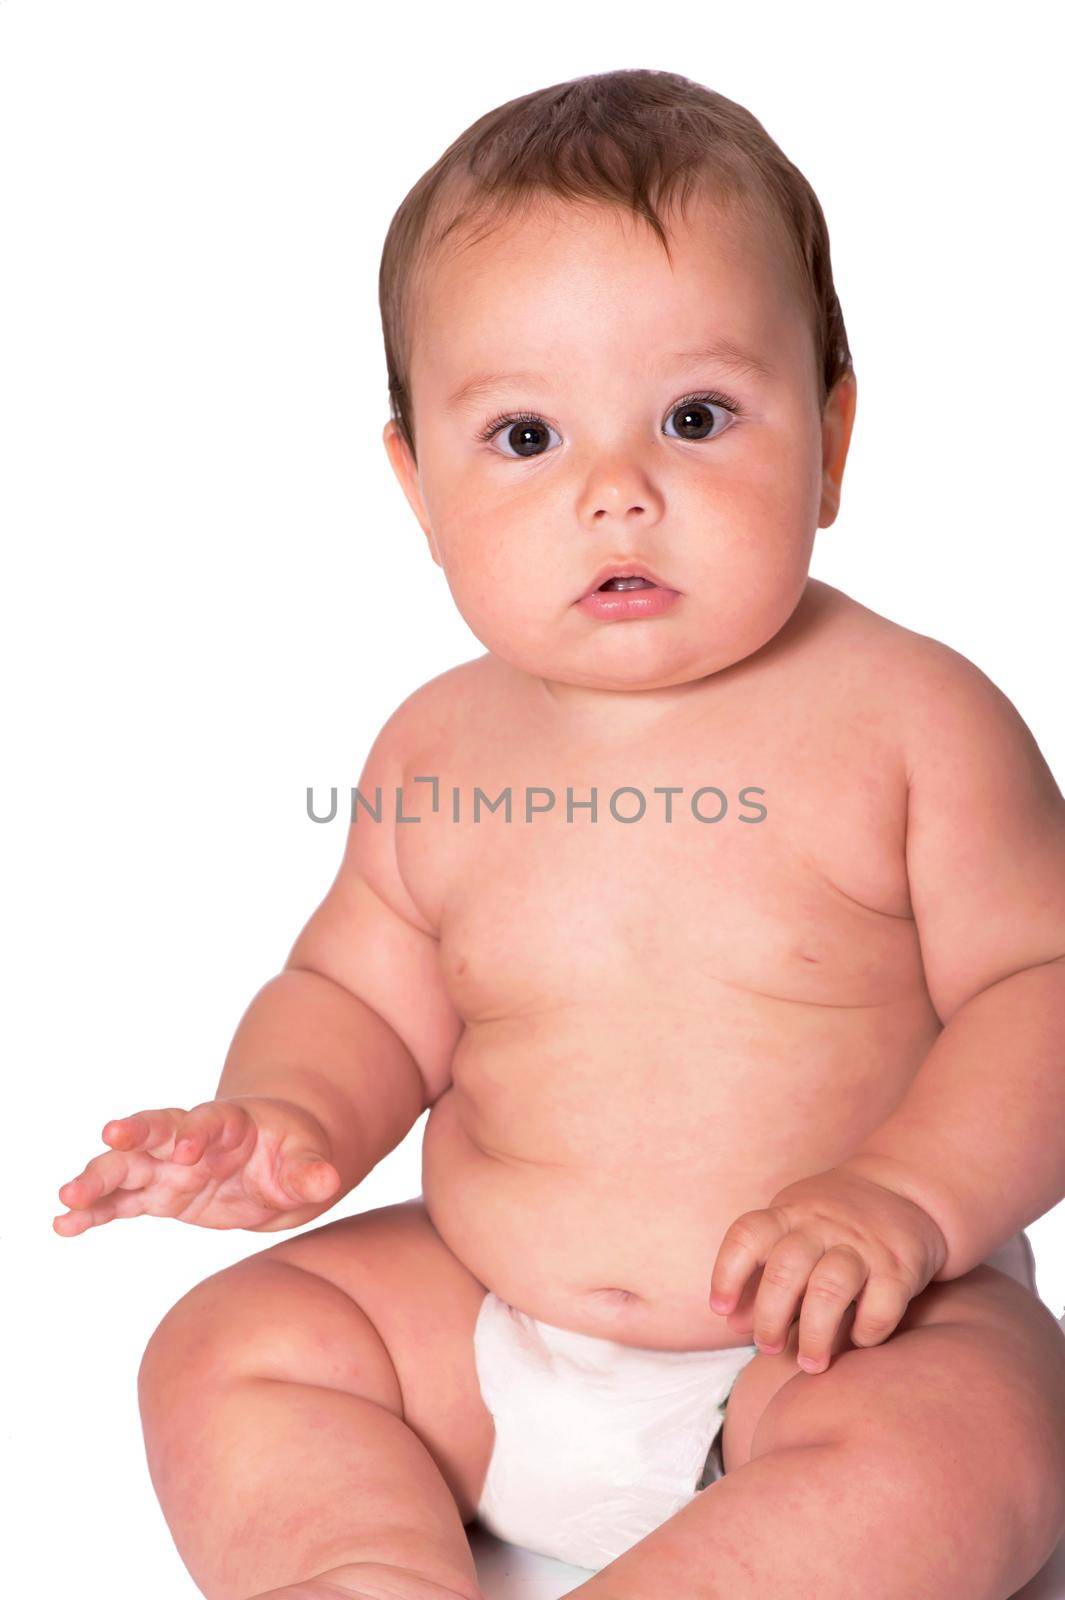 Little baby boy lying on the bed on white background by aprilphoto